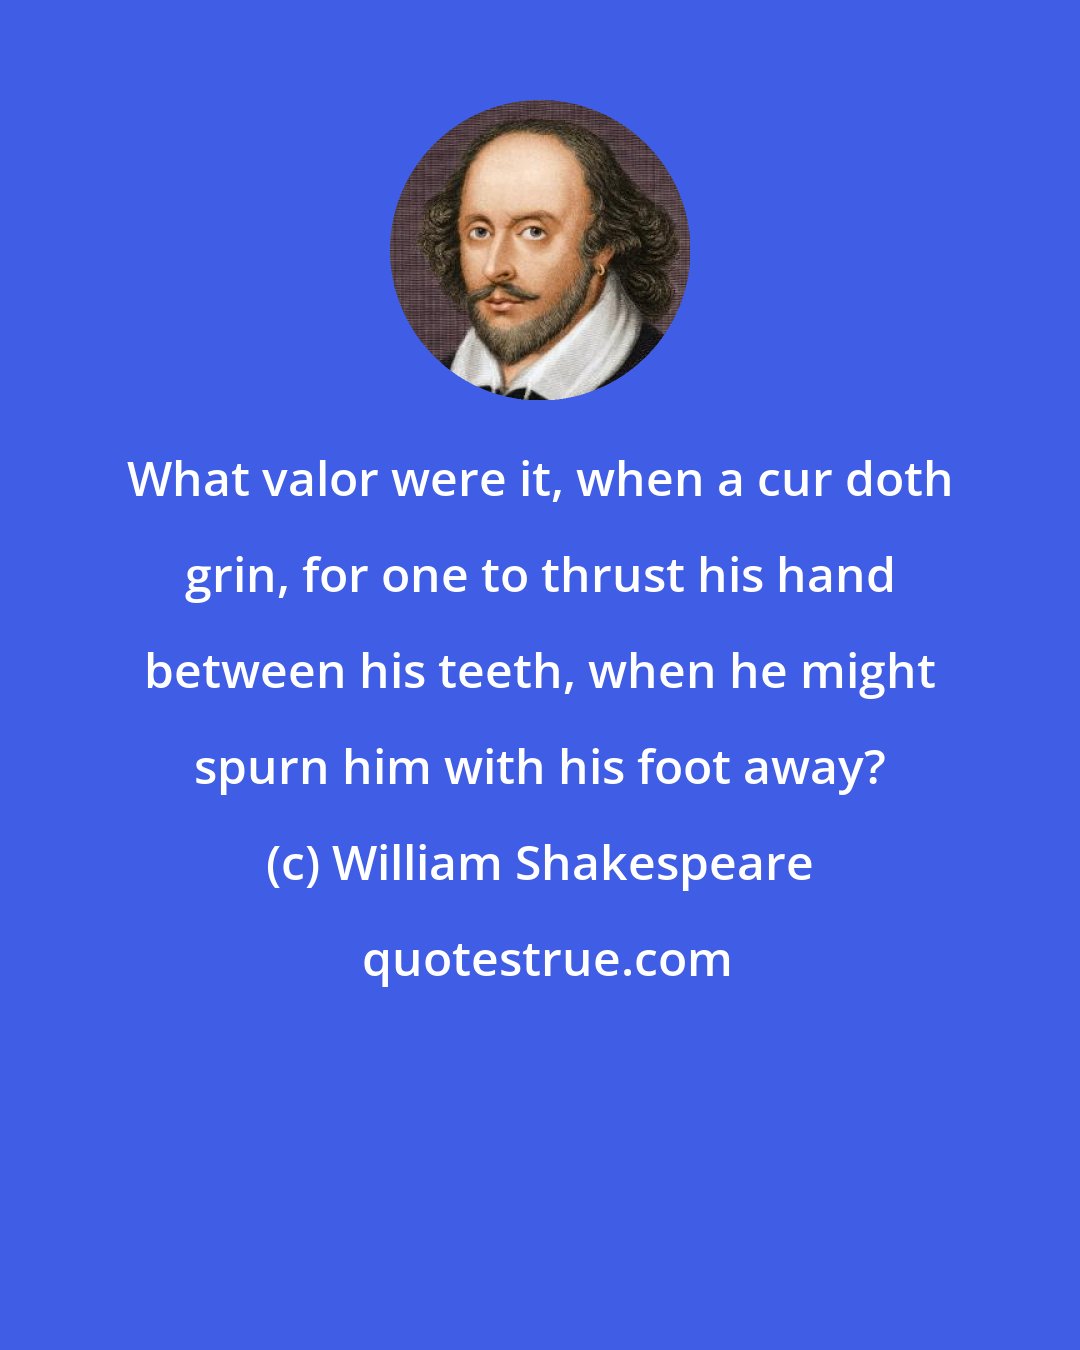 William Shakespeare: What valor were it, when a cur doth grin, for one to thrust his hand between his teeth, when he might spurn him with his foot away?